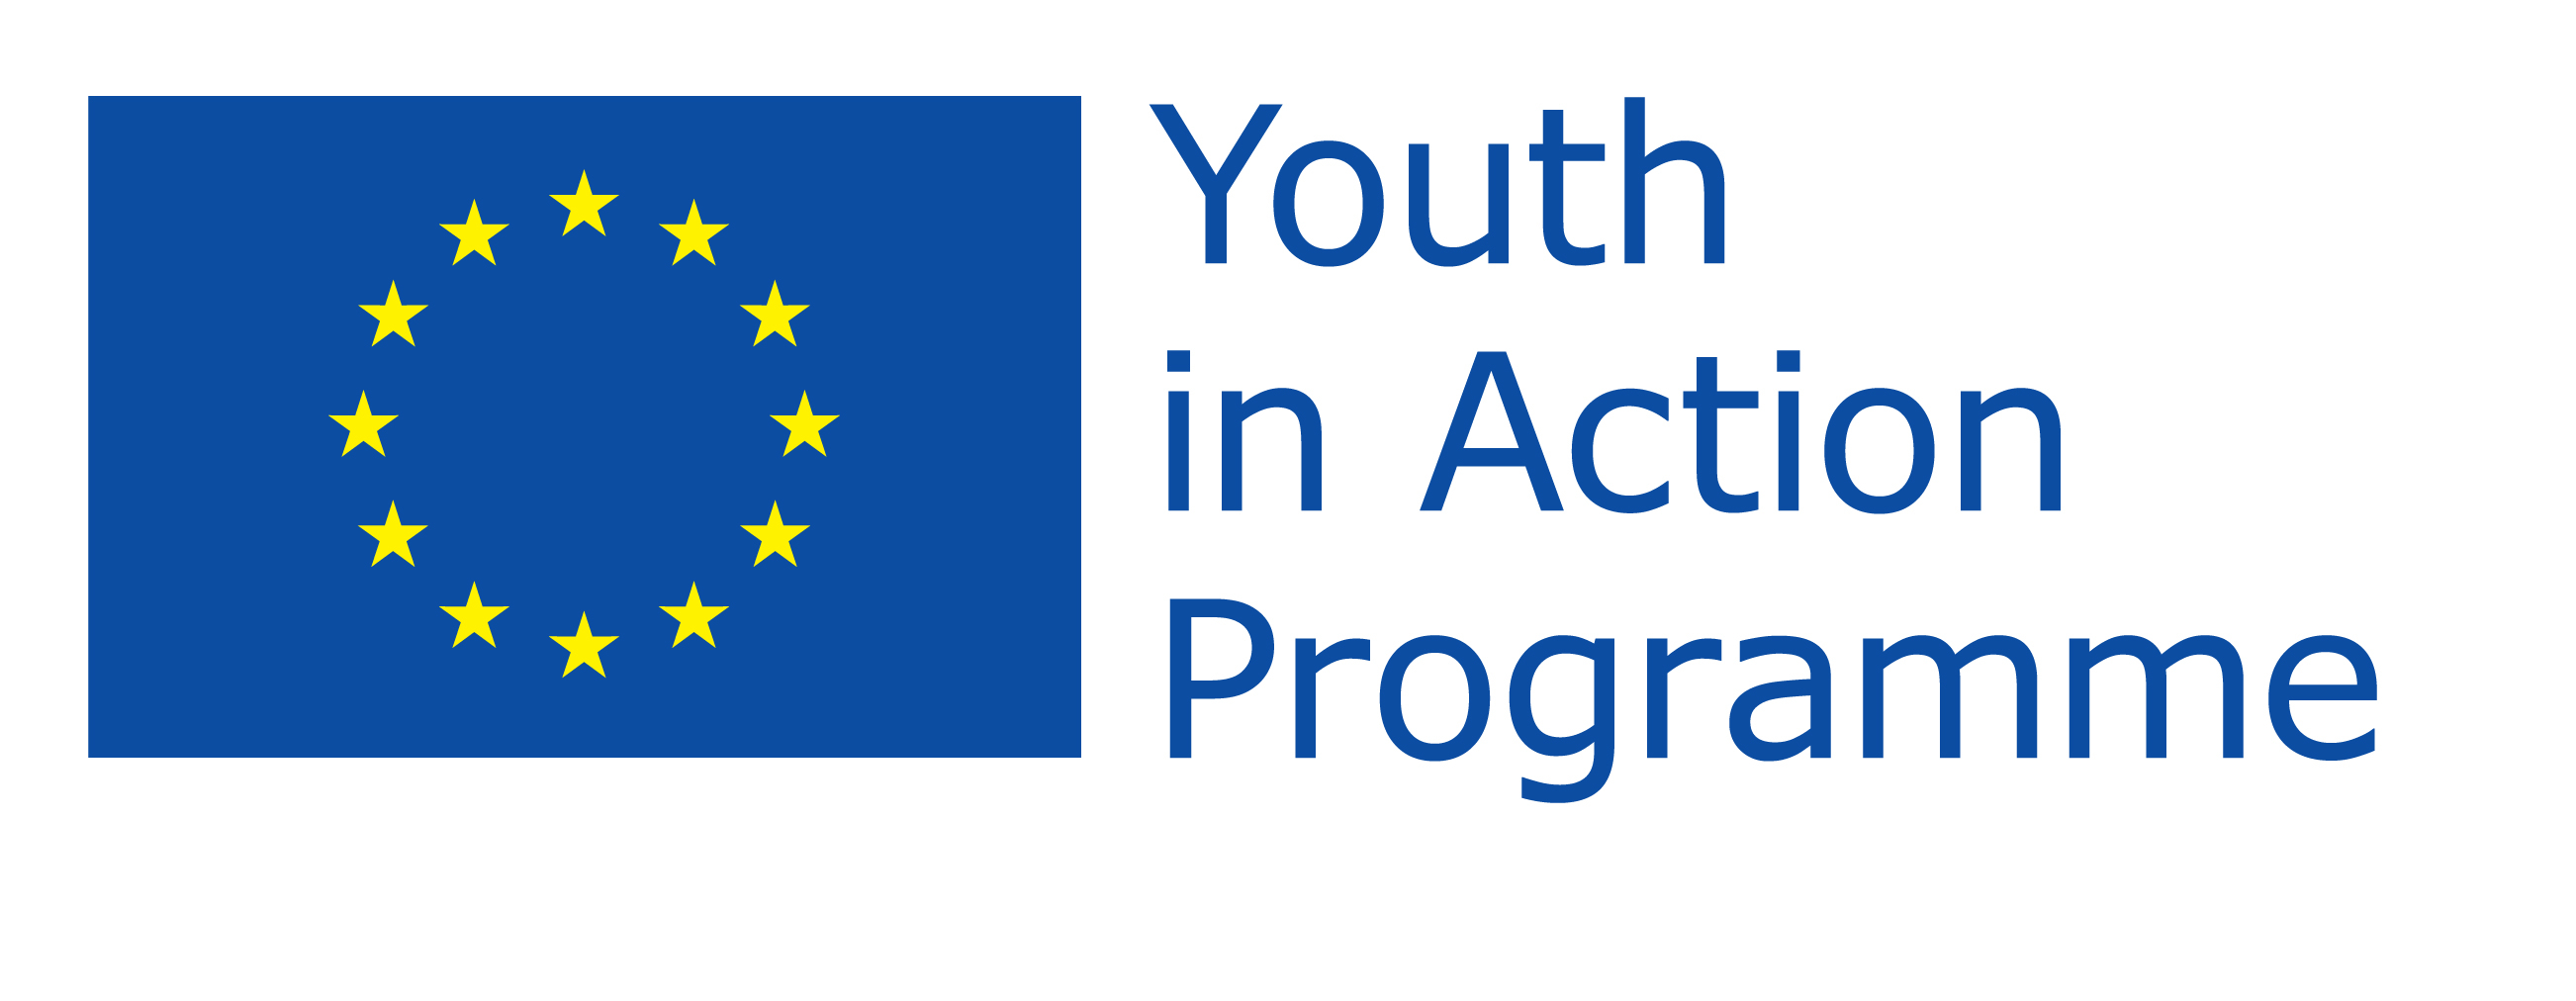 youth in action programm